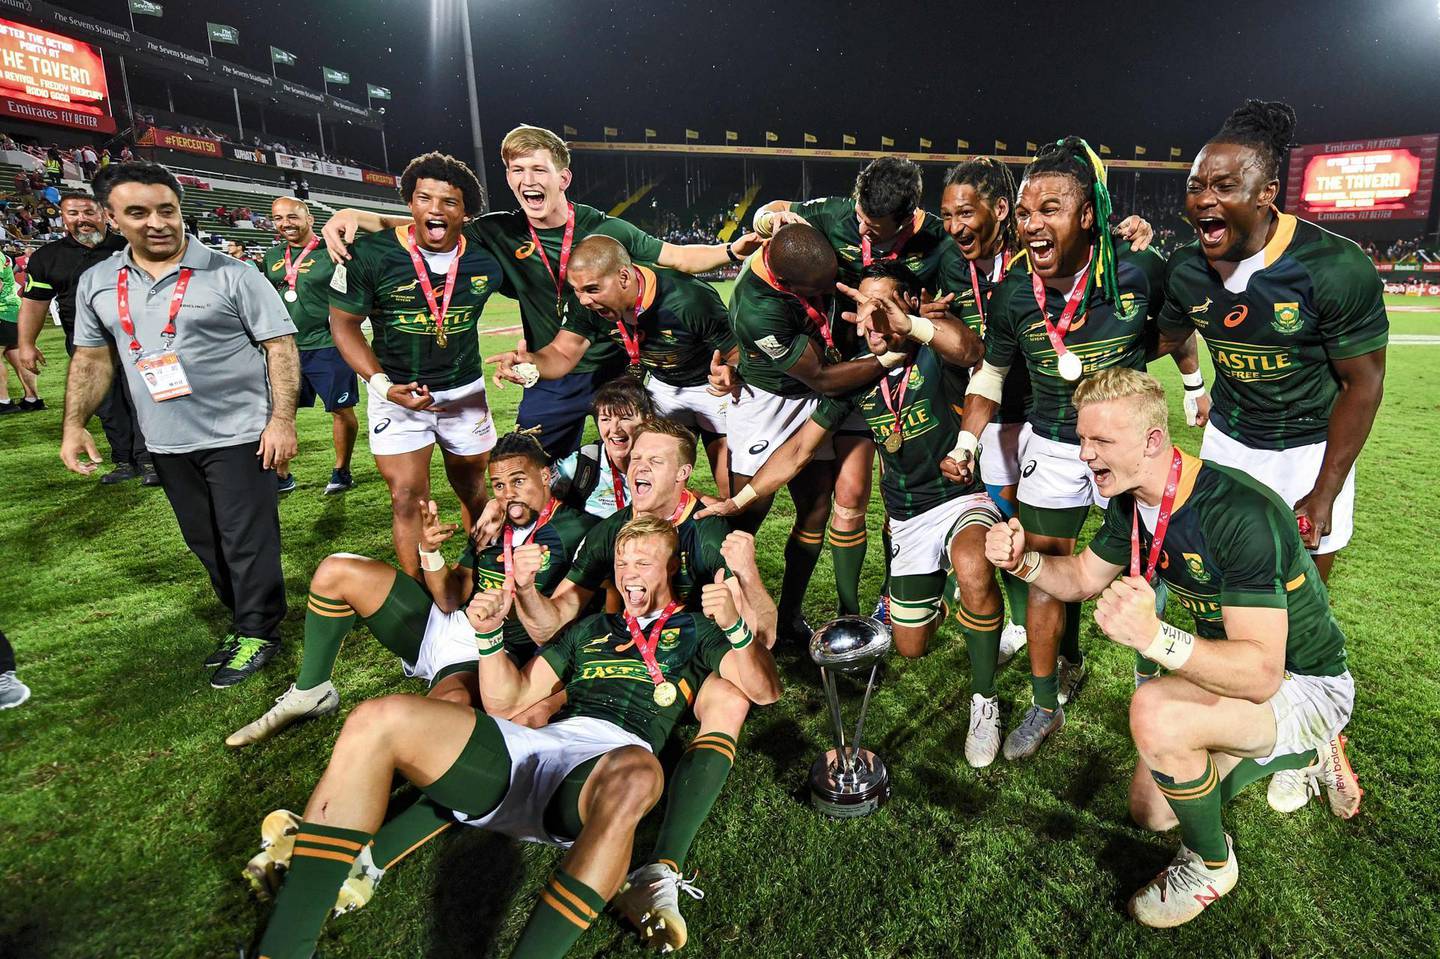 Members of the South Africa men's team pose for a picture as they celebrate with the trophy after winning the HSBC Dubai Sevens Series men's cup, at The Sevens Stadium in Dubai on December 7, 2019.  / AFP / KARIM SAHIB
